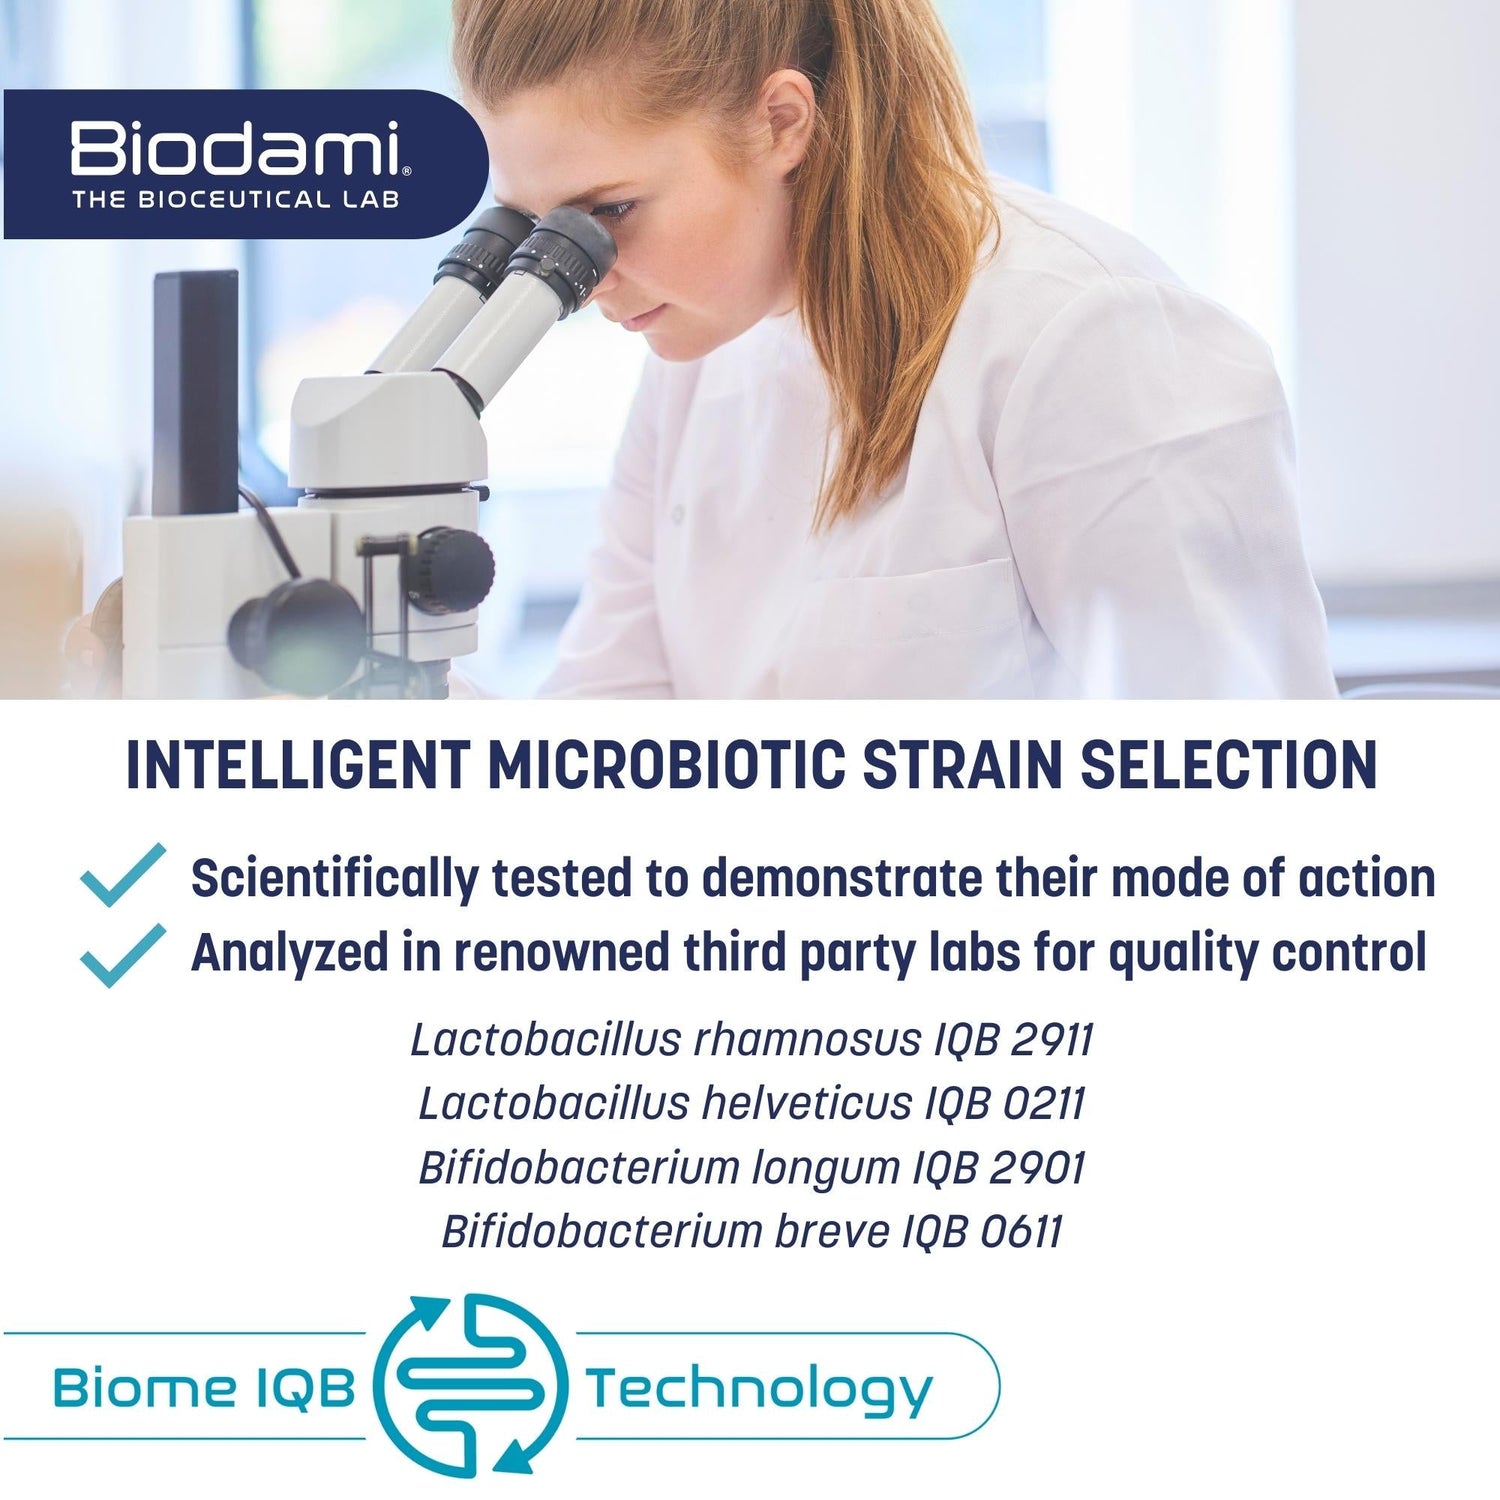 Laboratory setting. Intelligent probiotic strain selection, scientifically tested to demonstrate their mode of action and quality control 